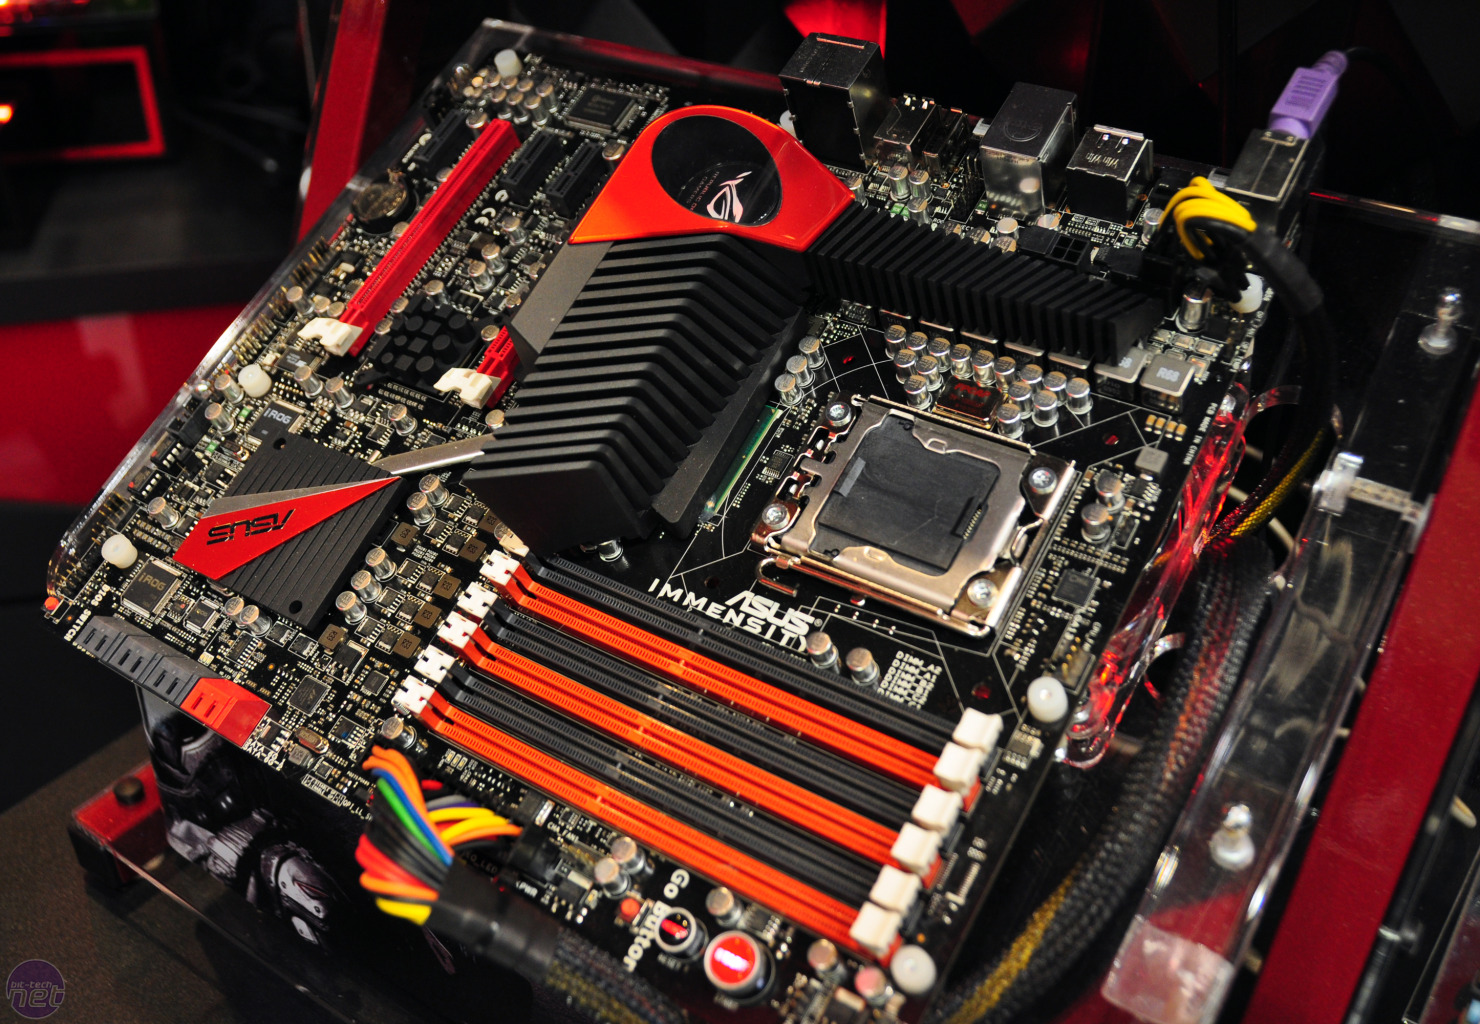 http://images.bit-tech.net/content_images/2010/06/asus-immensity-board-with-on-board-hd-5770/asus-immensity-1-vlarge.jpg